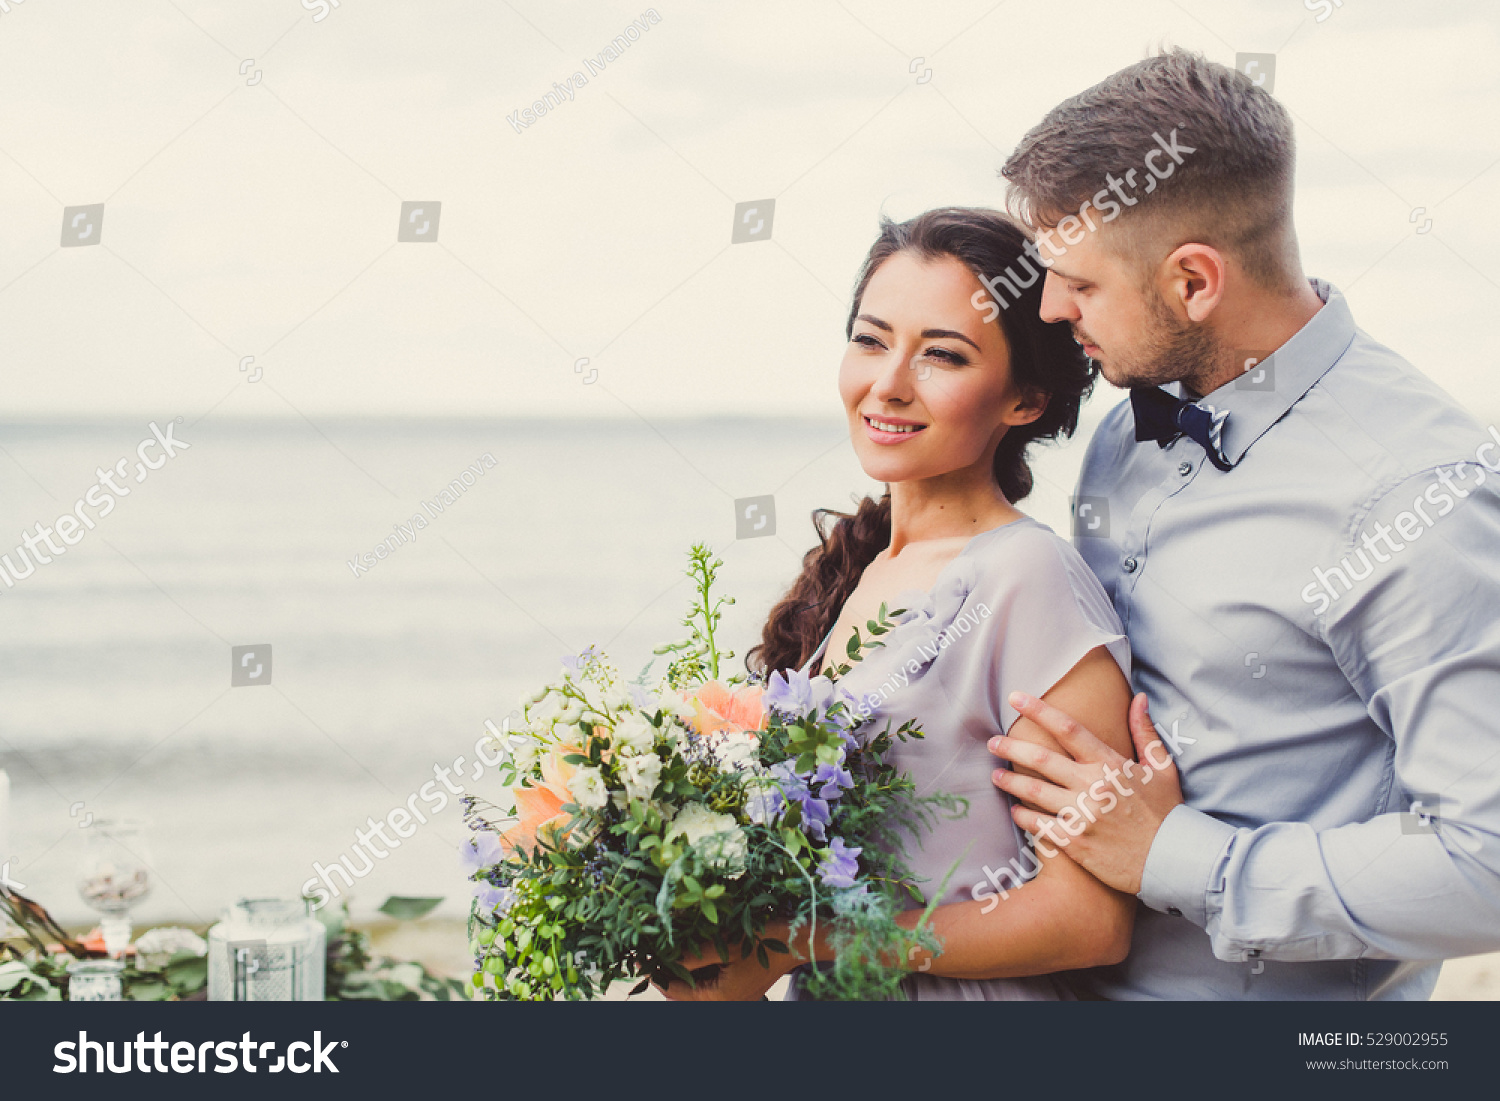 Bride and groom on the beach near the table decorations. Bride holding a beautiful bouquet. #529002955